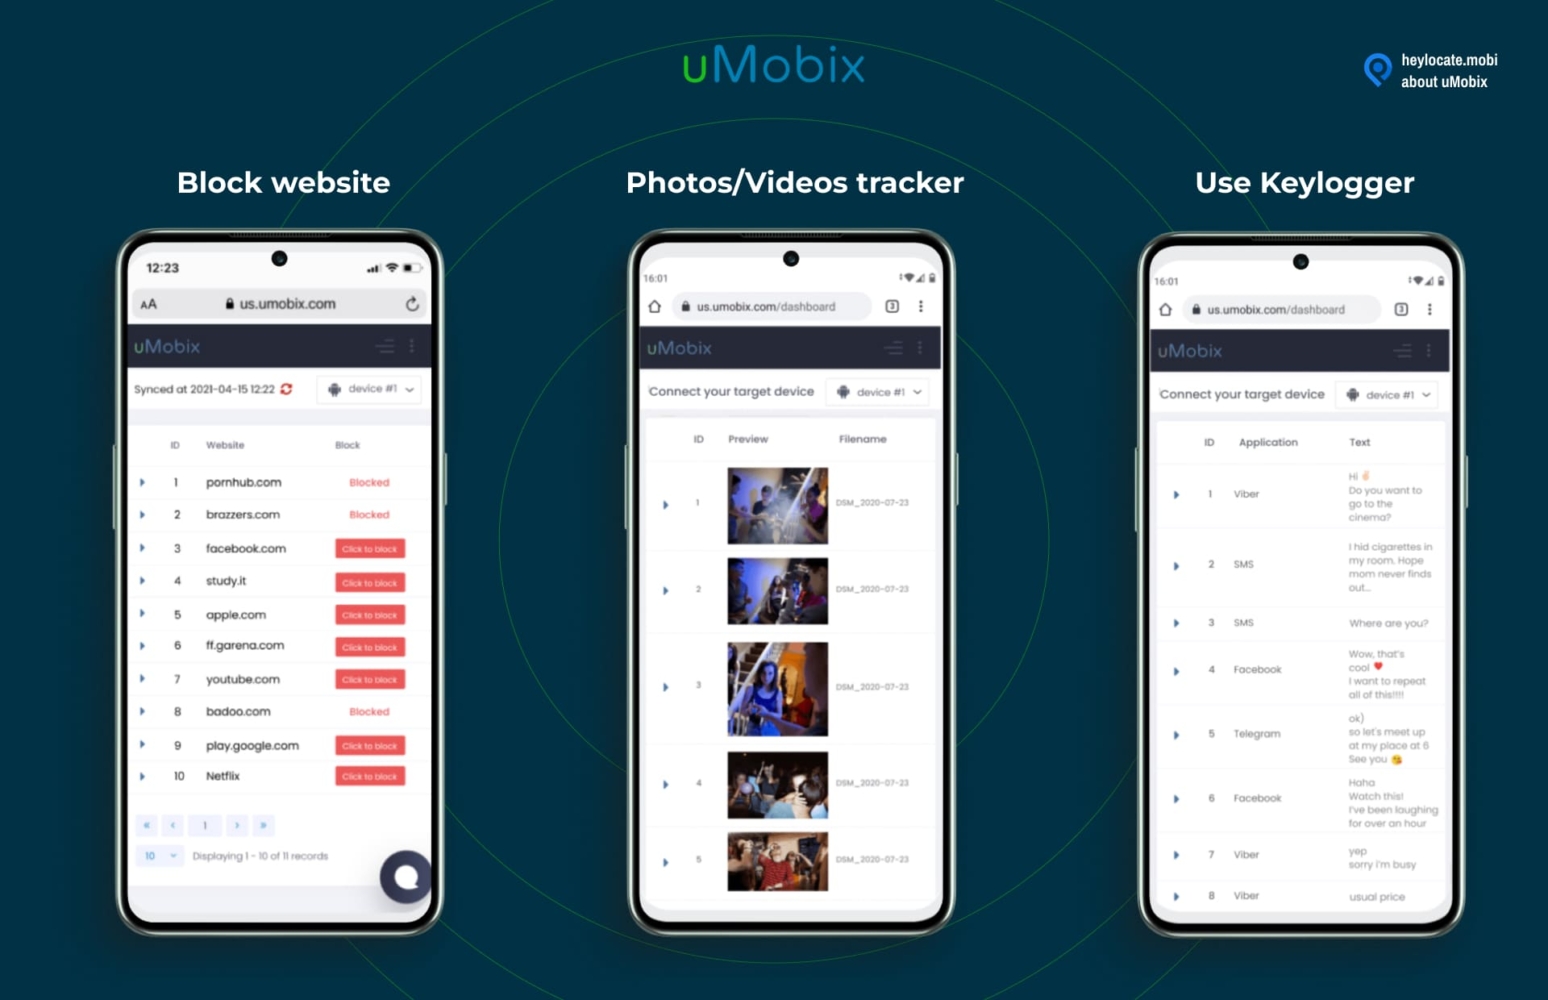 uMobix's mobile monitoring features. On the left, a smartphone screen shows a web blocking feature with a list of websites and options to block access. The middle screen showcases a media tracker with thumbnail previews of photos and videos stored on the device. The right screen illustrates a keylogger capturing text input in various applications like Viber, SMS, Facebook, and Telegram. These images represent the diverse functionalities available for parental control and device monitoring with uMobix.